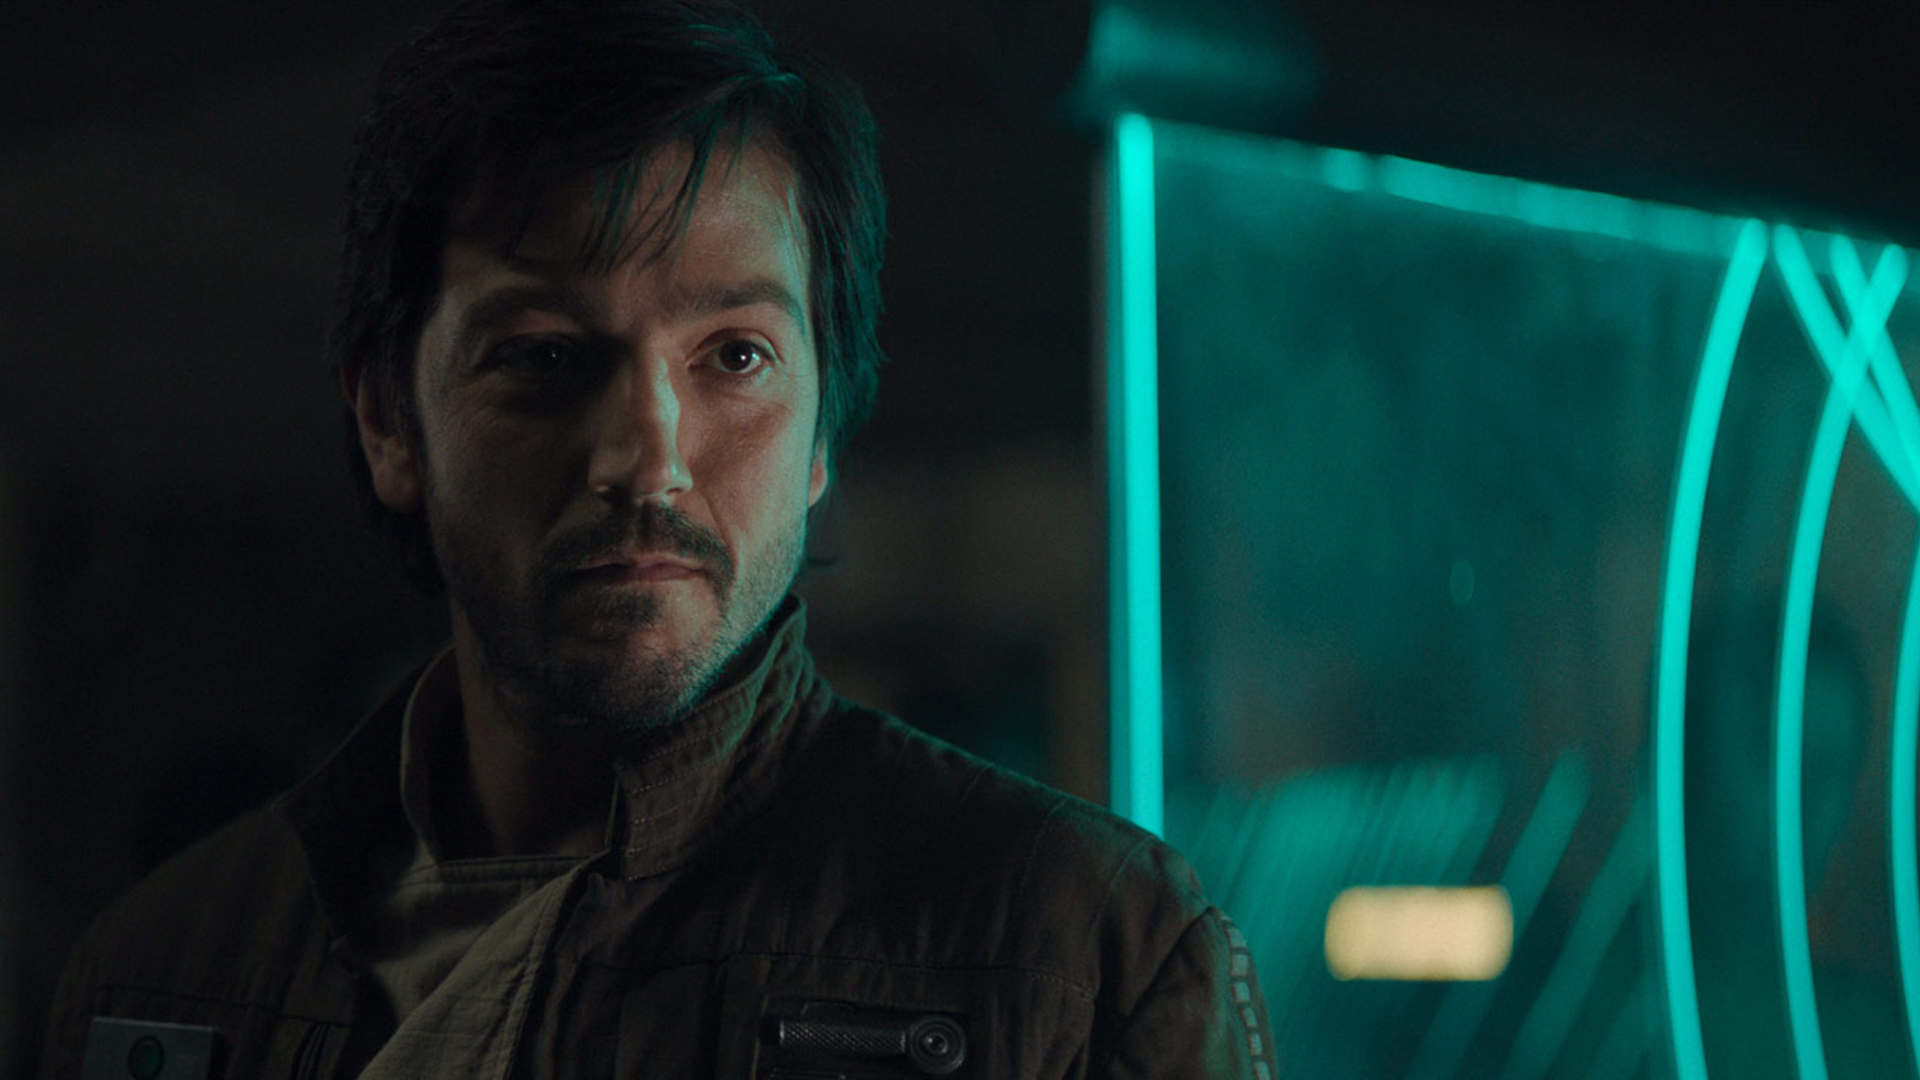 Cassian Andor from Rogue One: A Star Wars Story